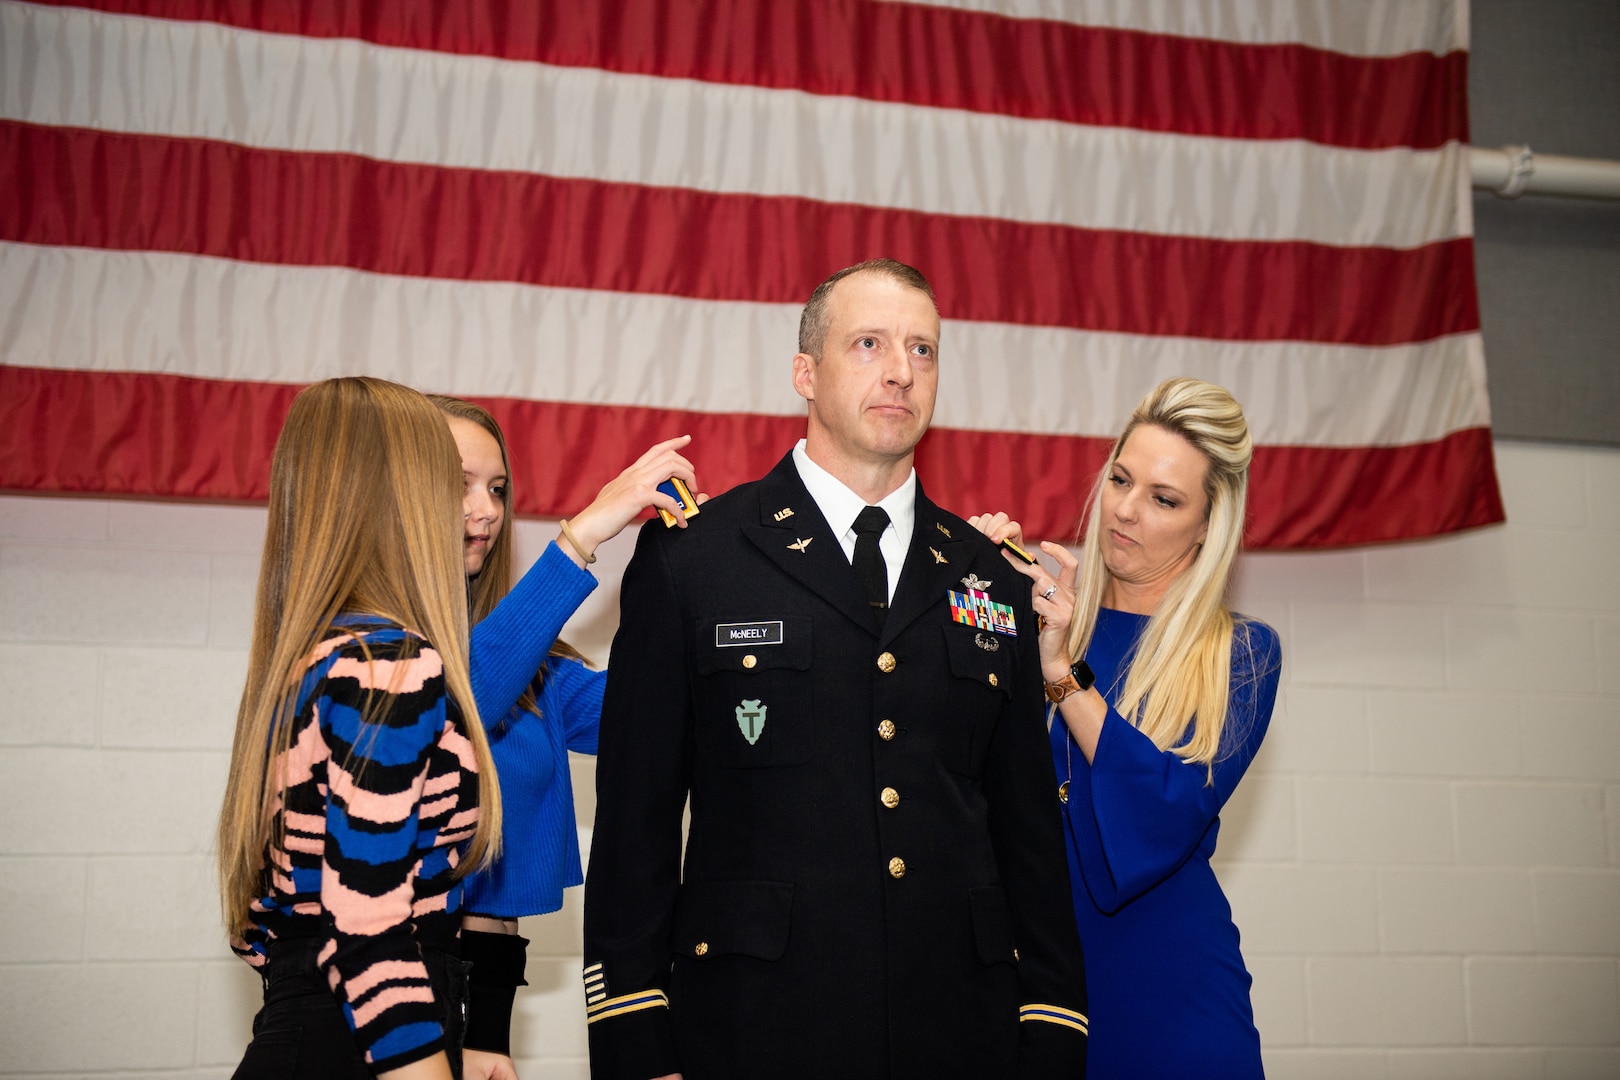 Dustin McNeely, an Army aviator with Company C, 2nd Battalion, 245th Aviation Regiment, 90th Troop Command, is pinned as a Chief Warrant Officer 5 during his promotion ceremony held in Oklahoma City, Nov. 17, 2022. McNeely's wife Chasity and daughters Vivian and Elise pinned his new rank during the ceremony. (Oklahoma National Guard photo by Sgt. 1st Class Mireille Merilice-Roberts)